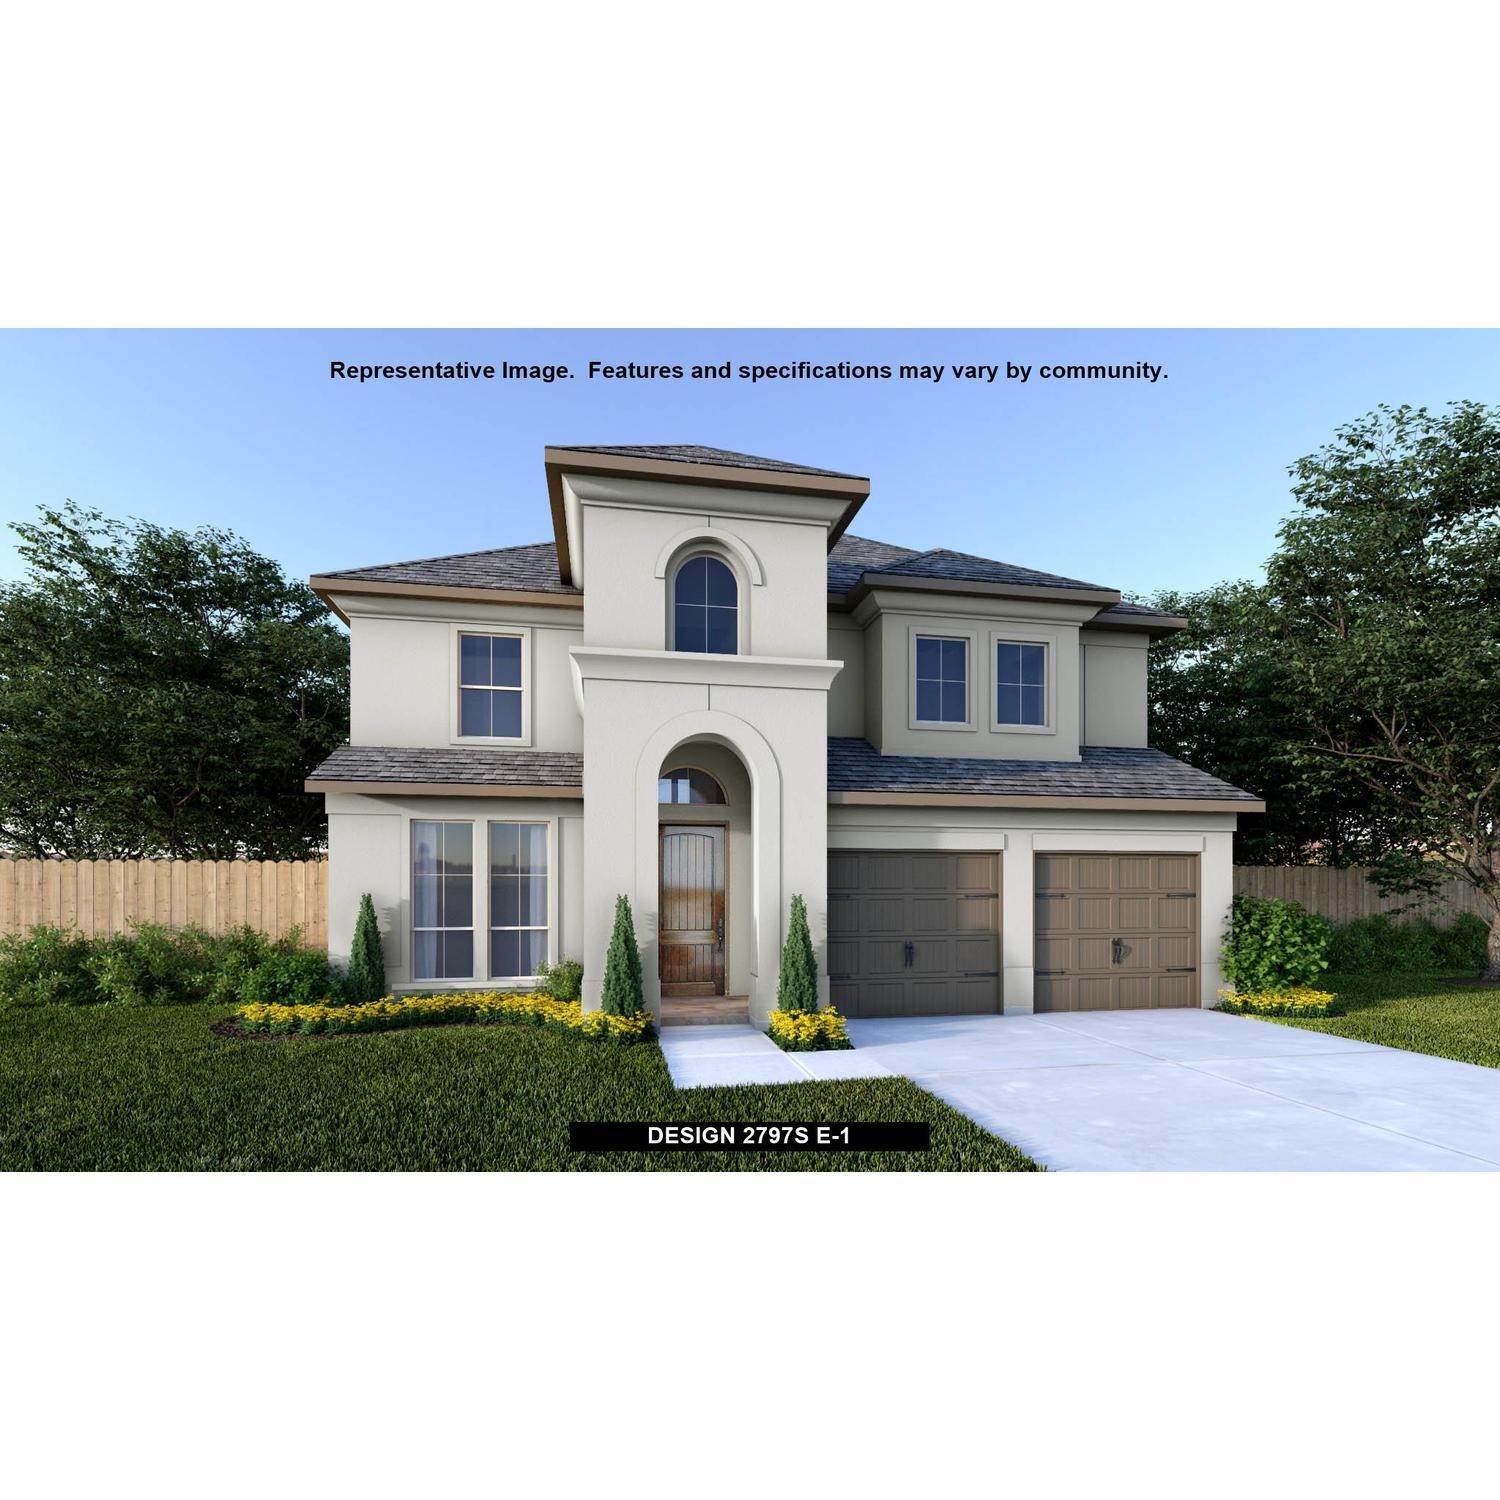 Single Family for Sale at Sweetwater 50' 5816 Antelope Well Lane, Austin, TX 78738